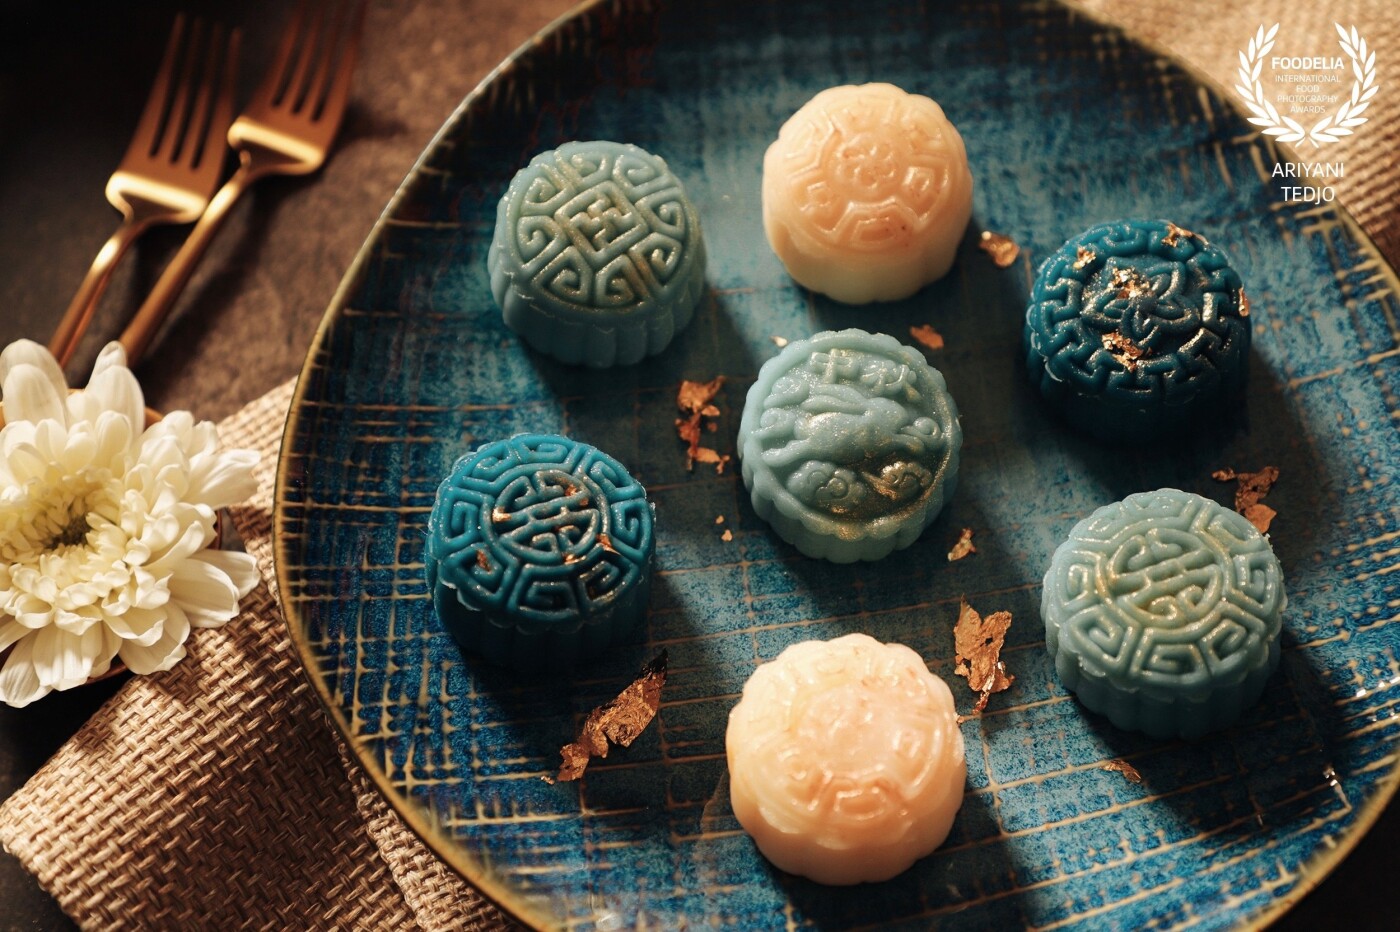 For the Mid-Autumn Festival this year, I decided to make my own mooncakes. One kind of mooncakes that I made is called snow skin mooncake as the skin is soft and slightly powdery. The skin is made of mochi dough and does not require any baking at all. For the paste fillings, I used durian purée in the blue mooncakes and custard in the white mooncake. The blue mooncakes used natural coloring from butterfly pea extract while the white ones are simply plain milk.